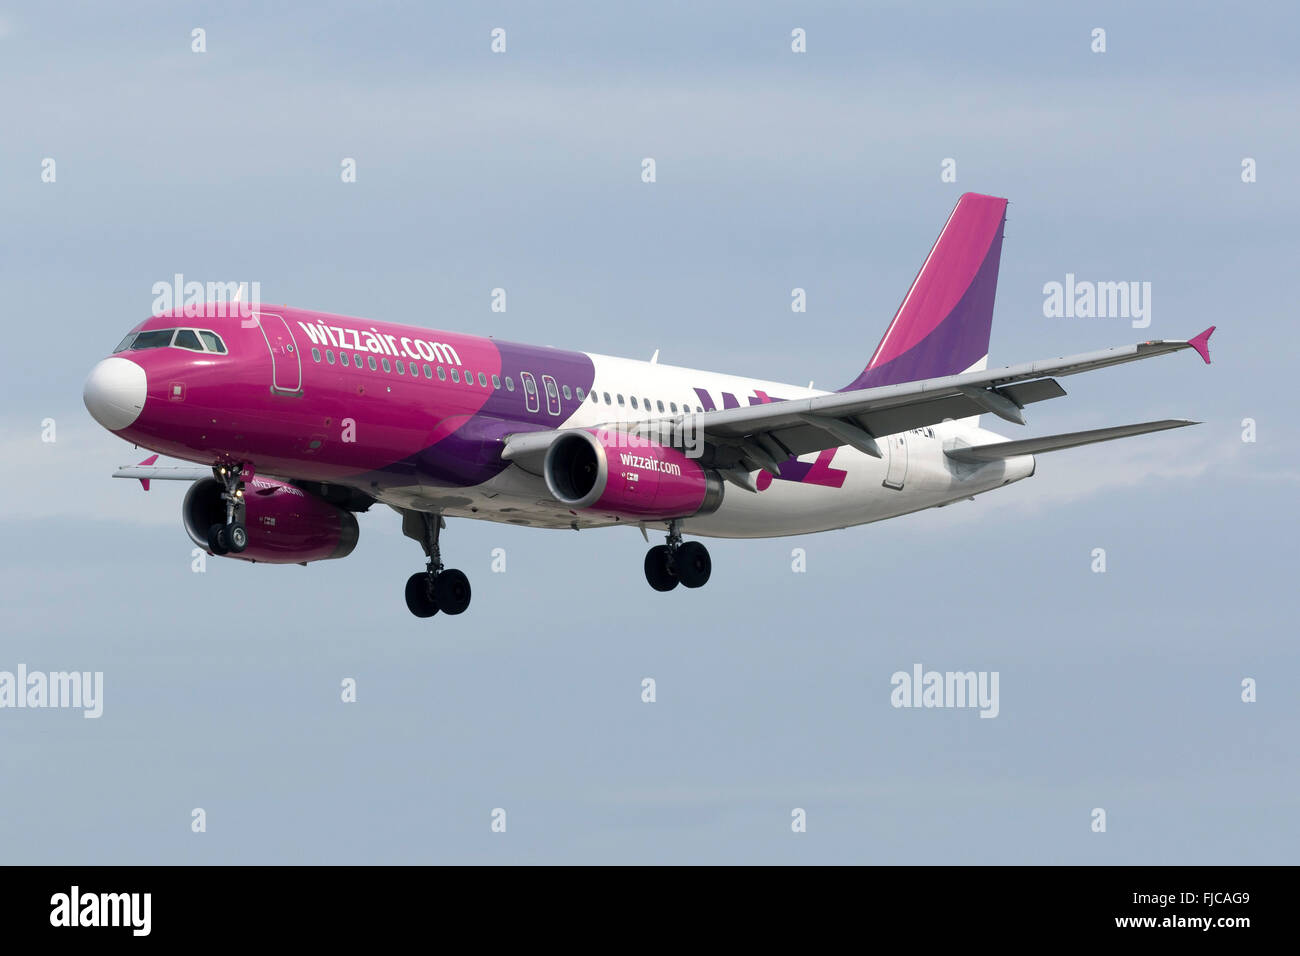 Wizz Air Airbus A320-232 [HA-LWI] on finals for runway 31, with a replaced white nose cone. Stock Photo